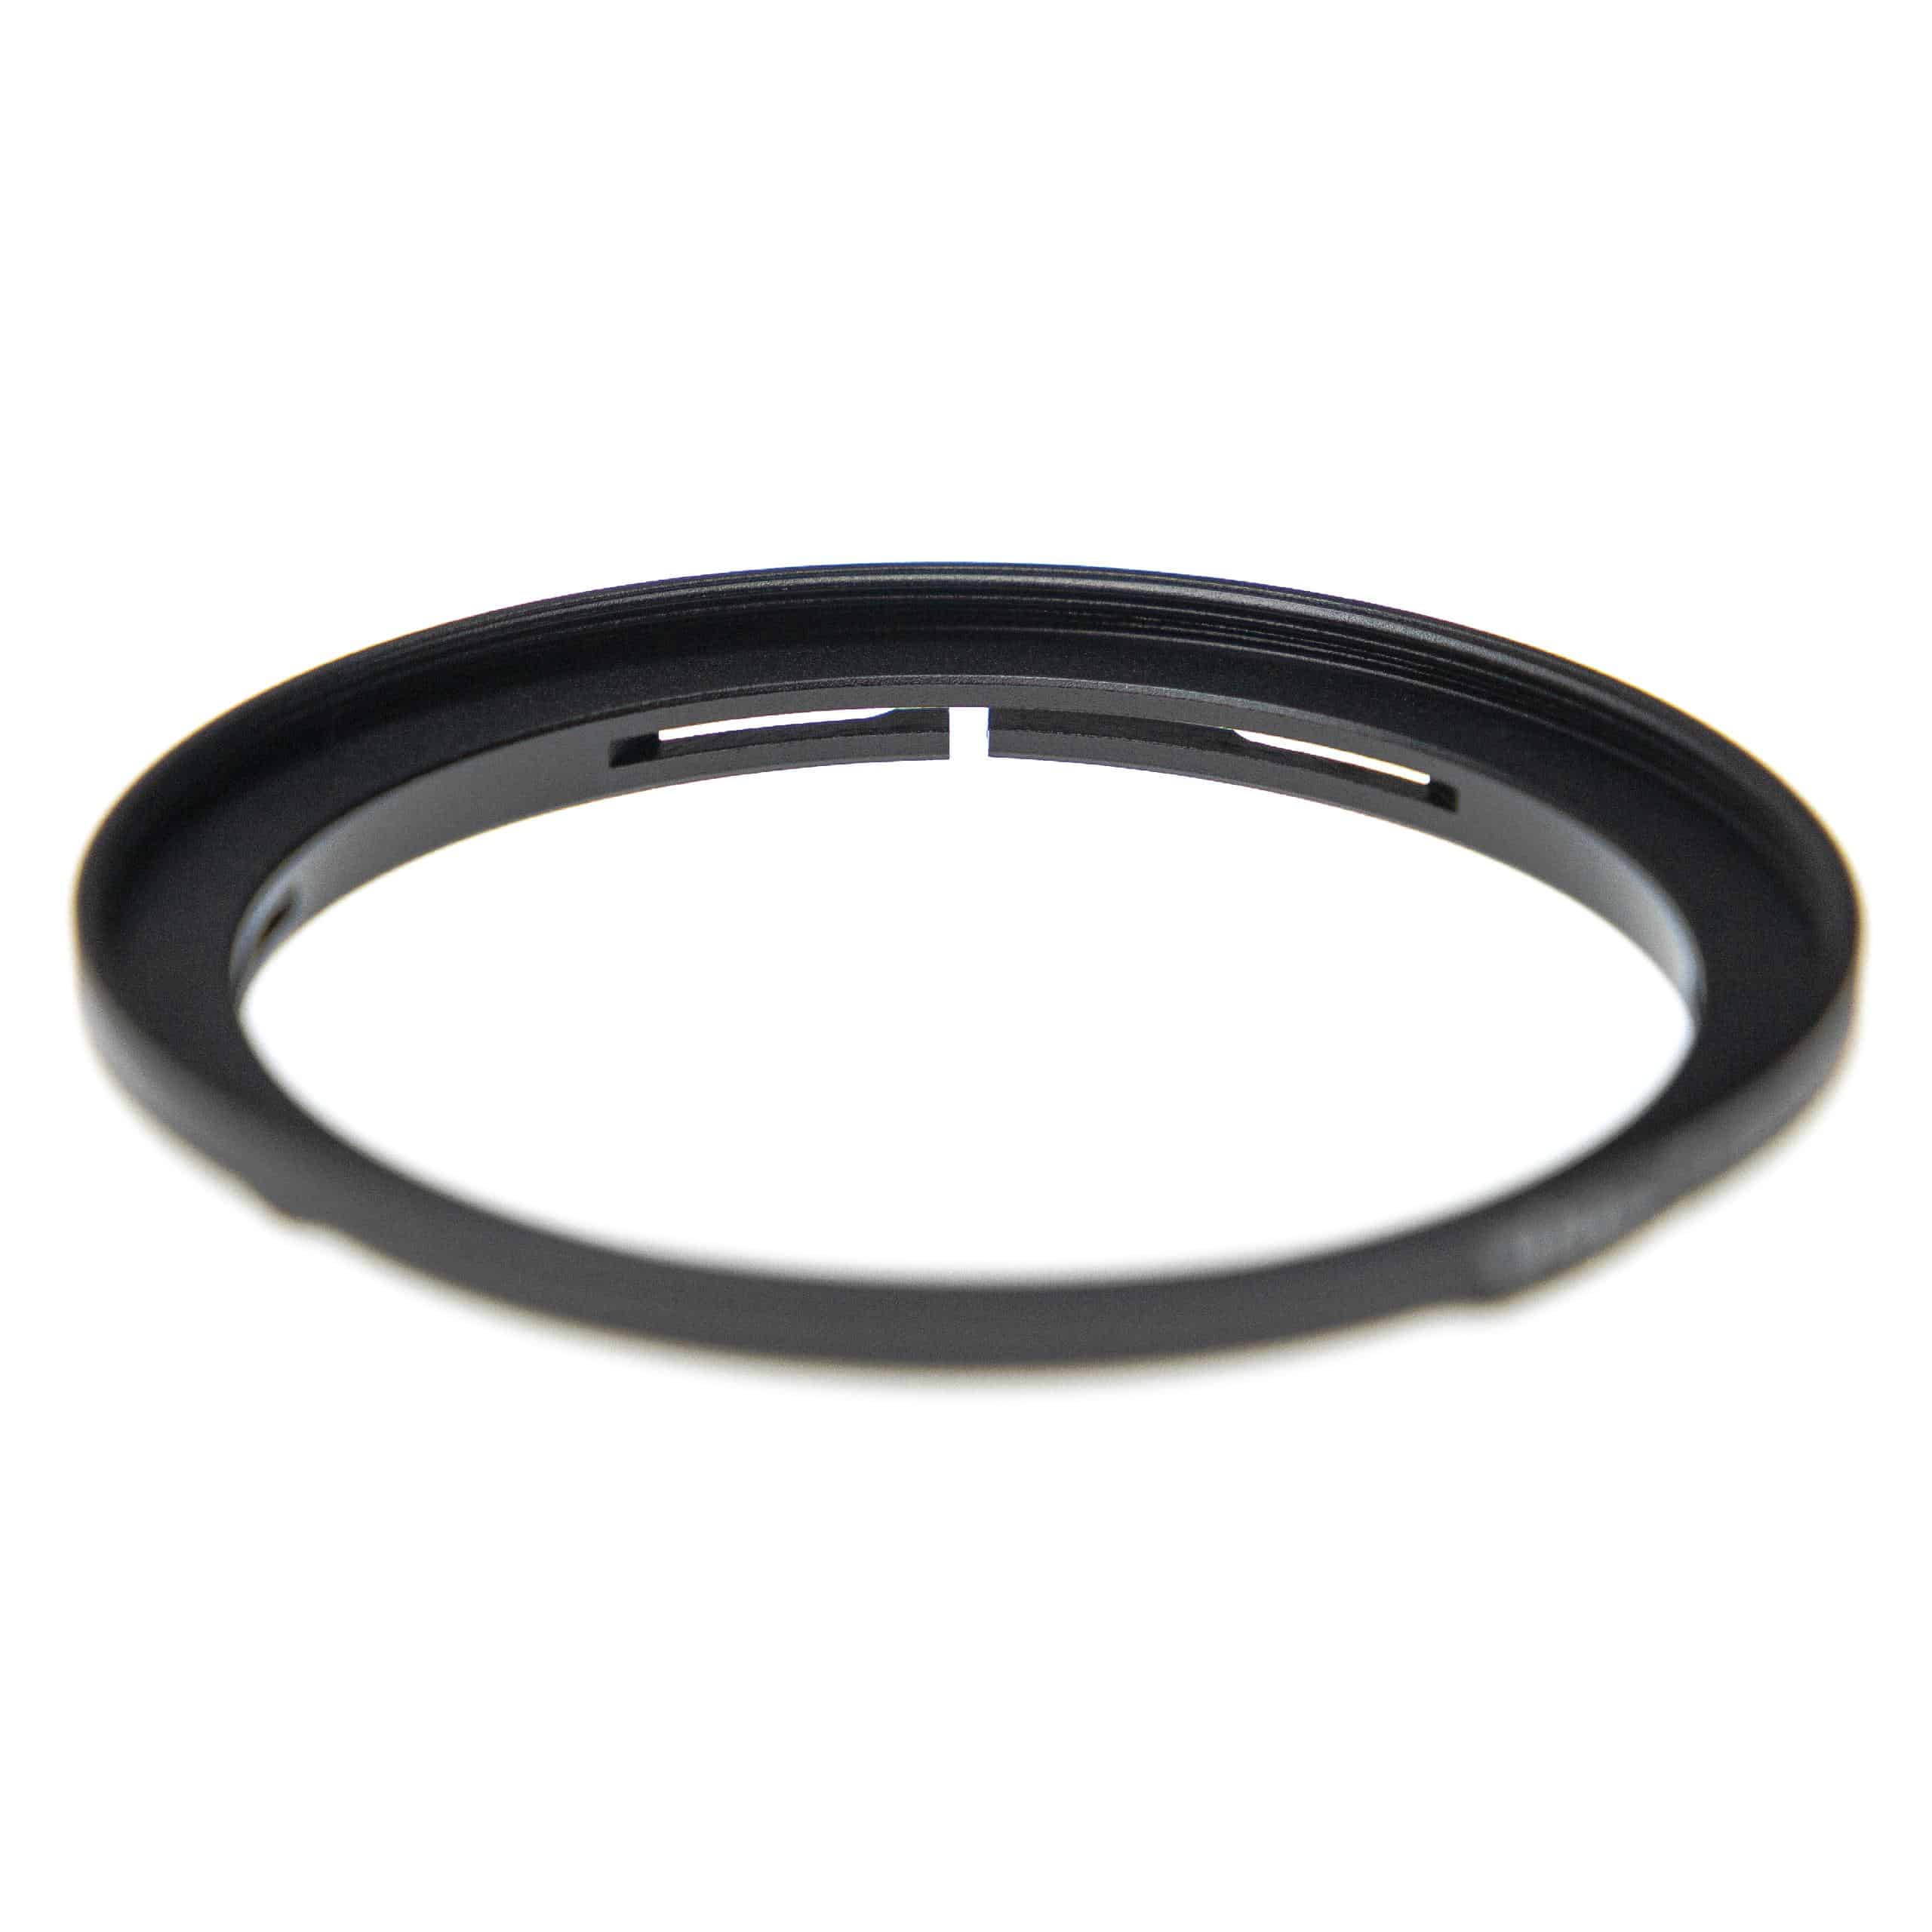 72 mm Filter Adapter suitable for Hasselblad B60 bayonet Camera Lens